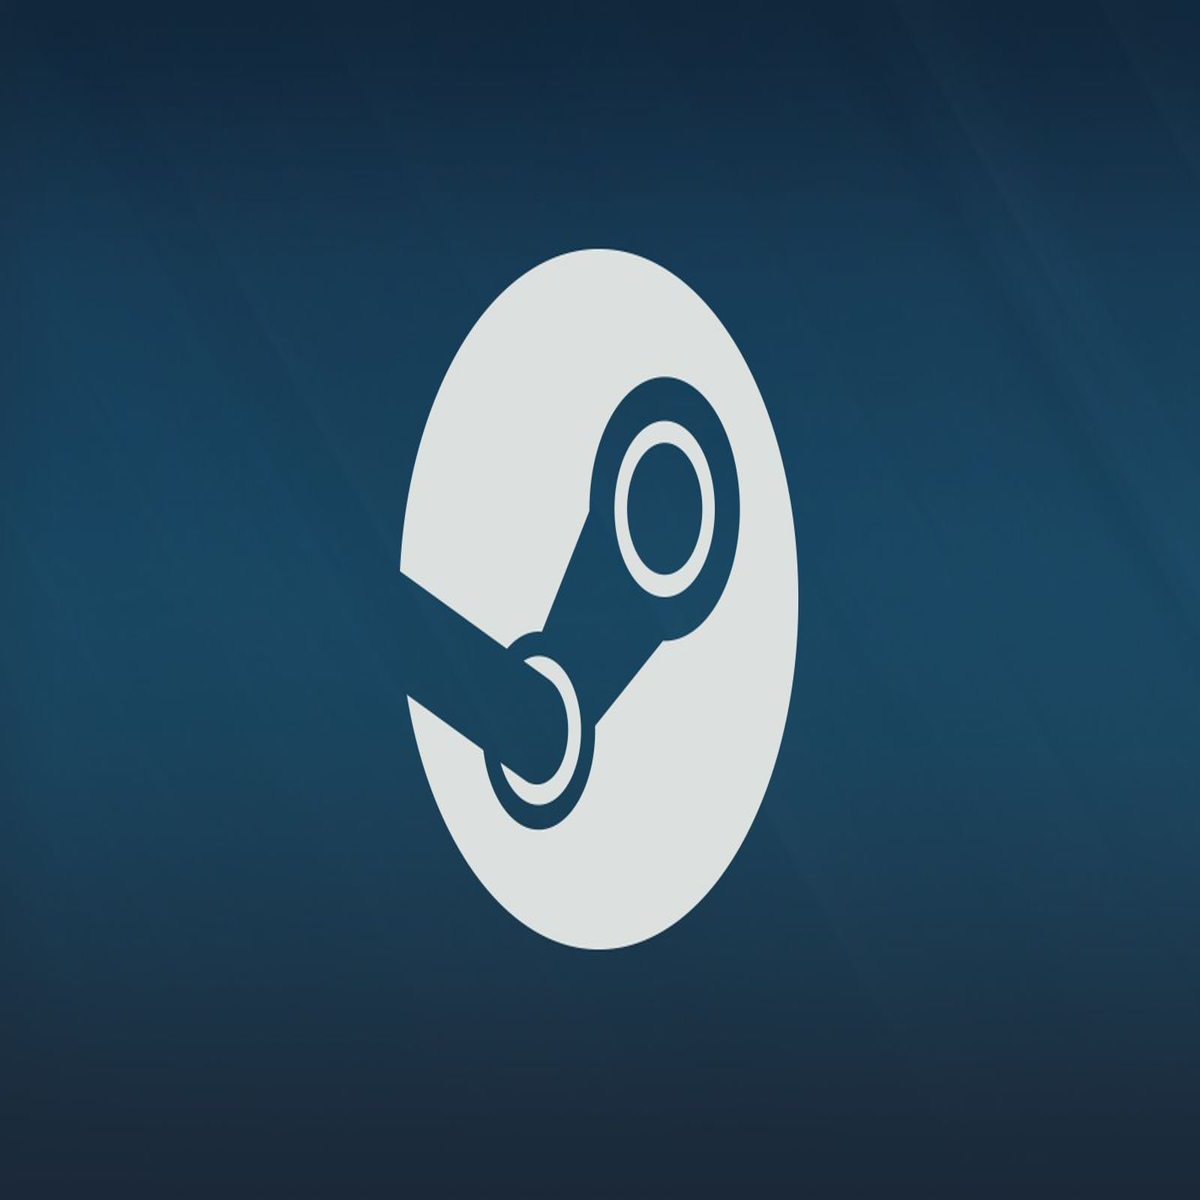 Steam Game Festival in February Will Give Players Access to Over 500  Playable Demos